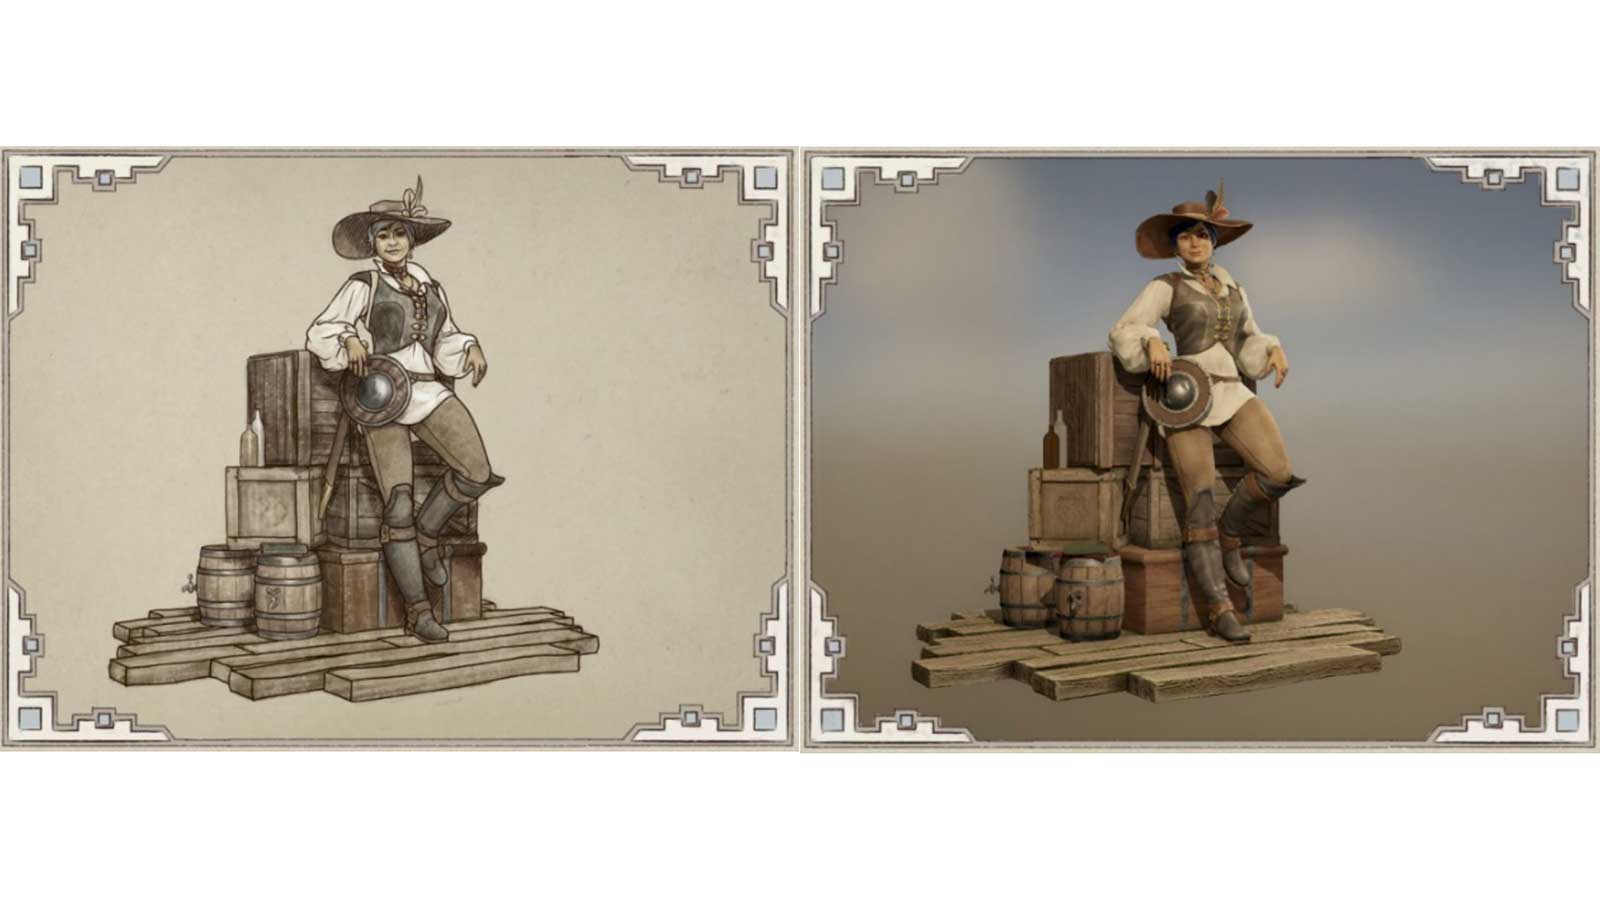 A side-by-side 2D drawing and 3D model of a woman with a sword and shield resting on crates.